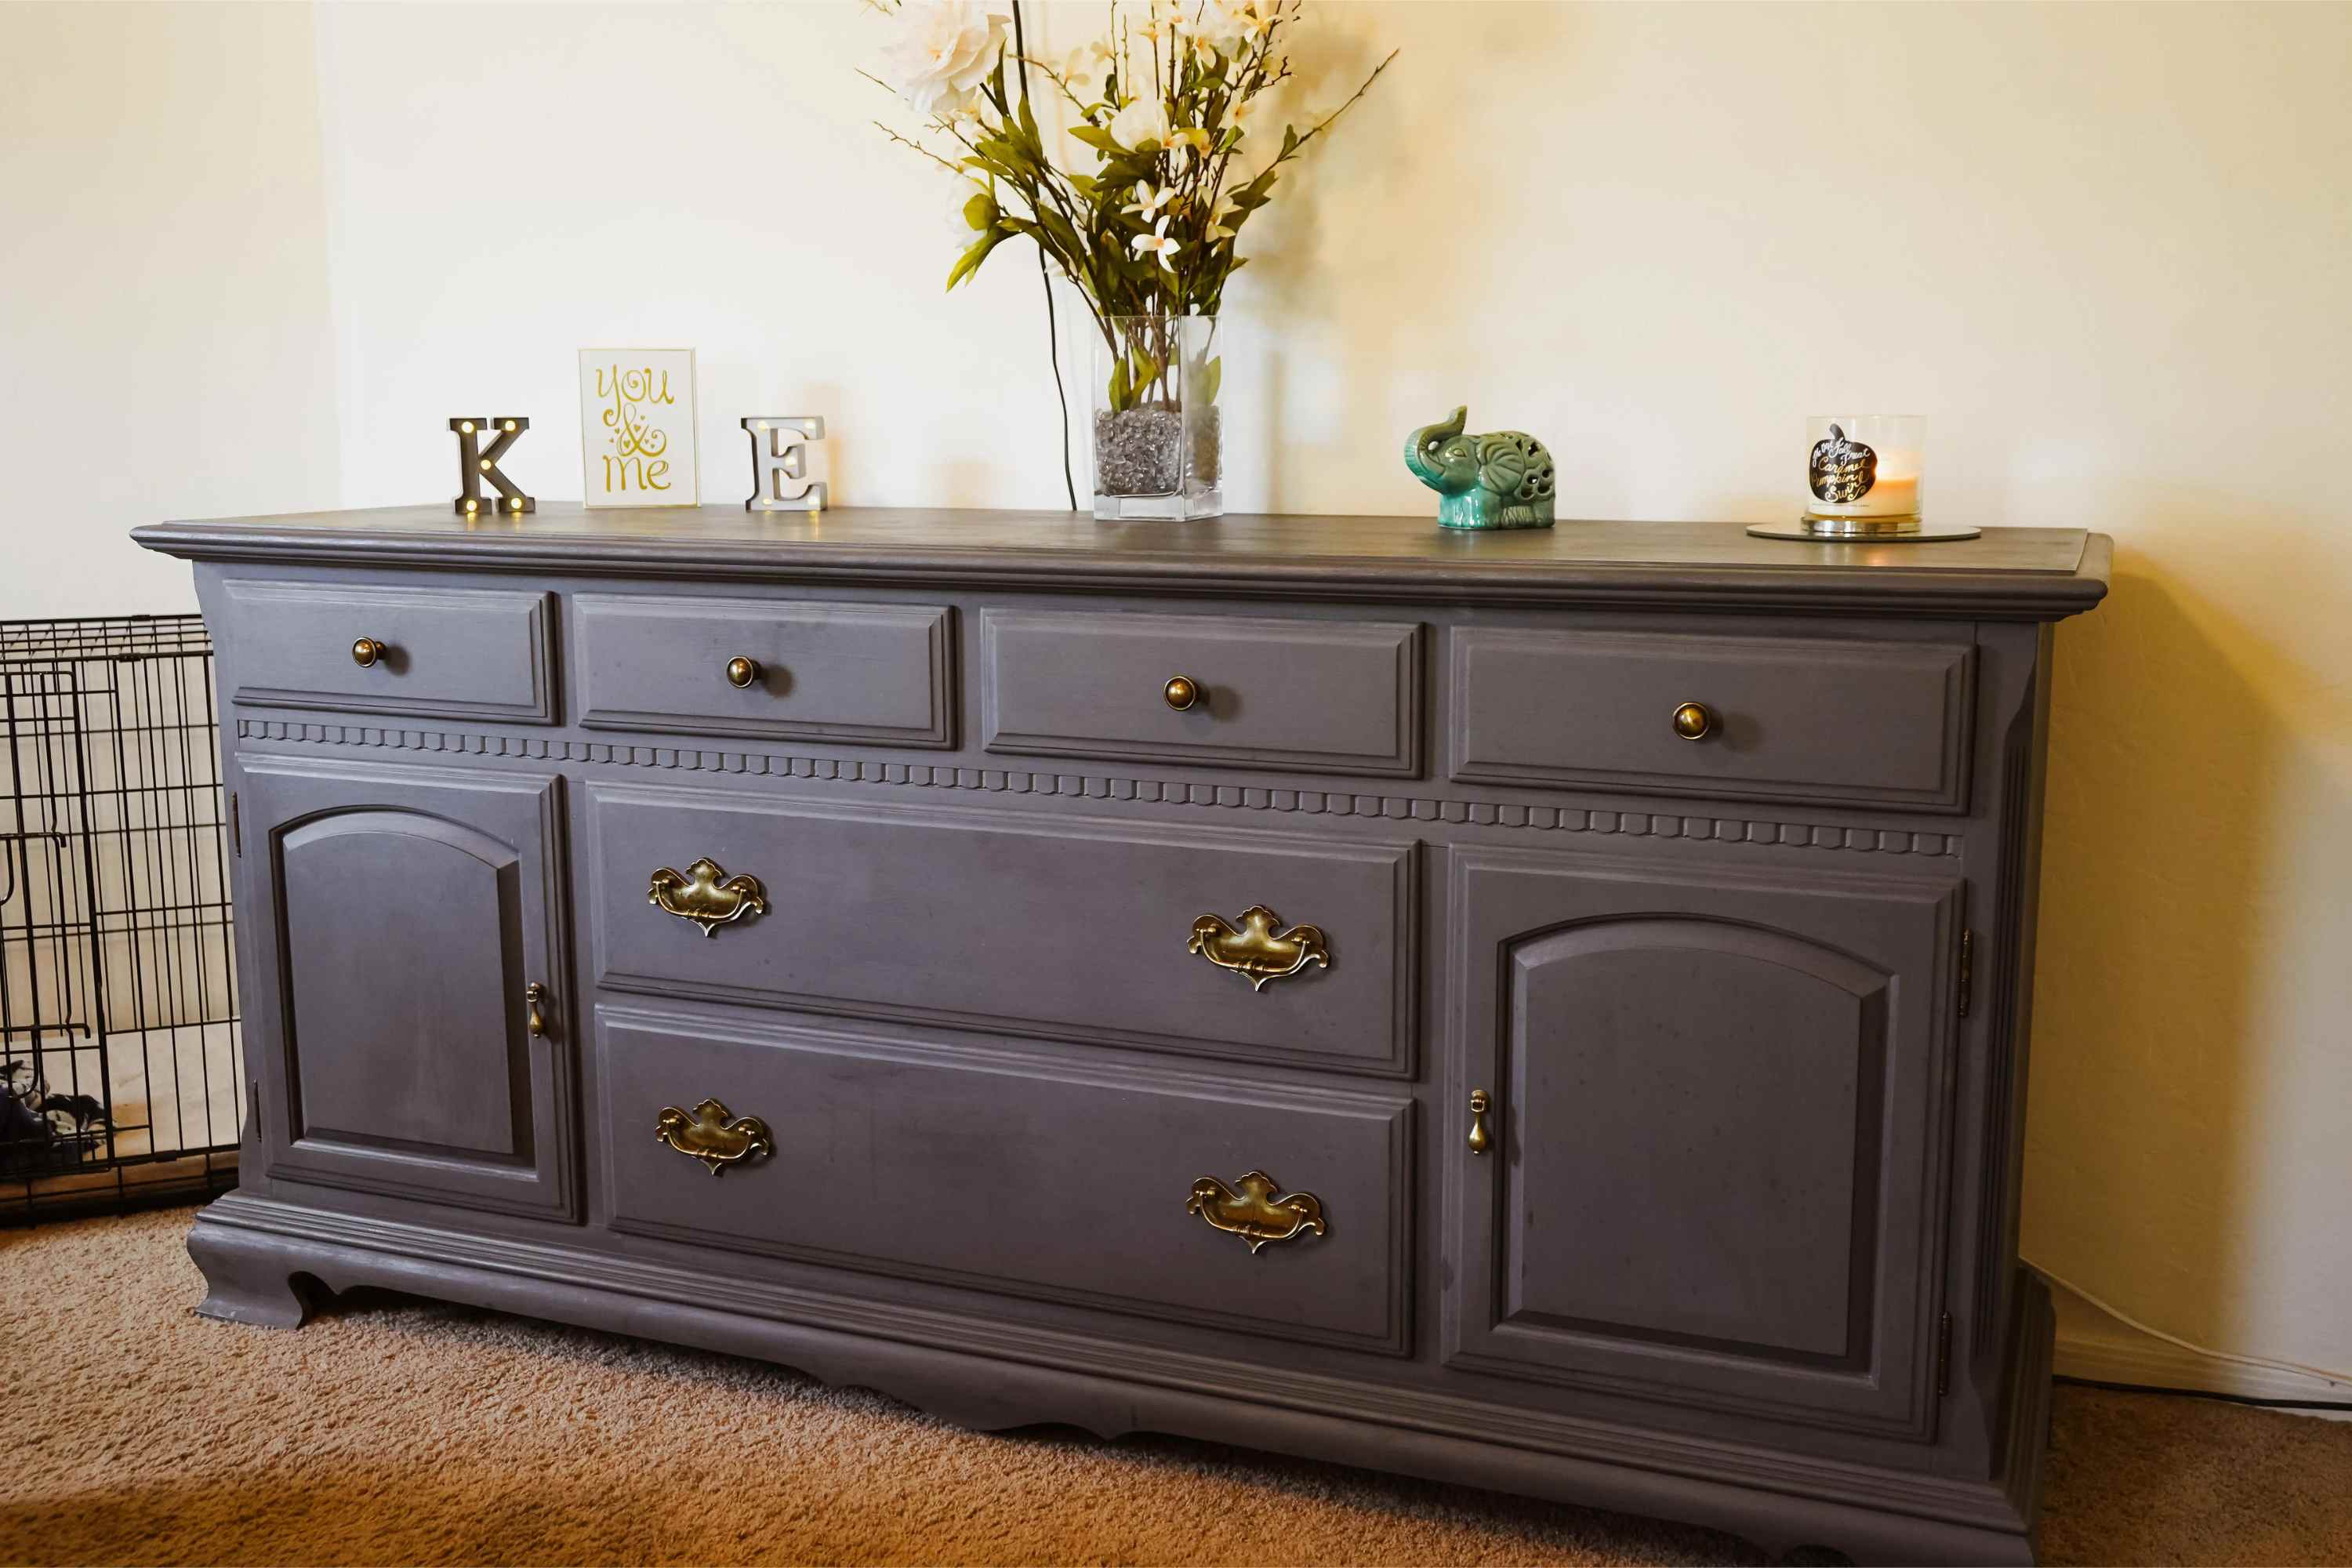 How To Paint Dresser Without Sanding